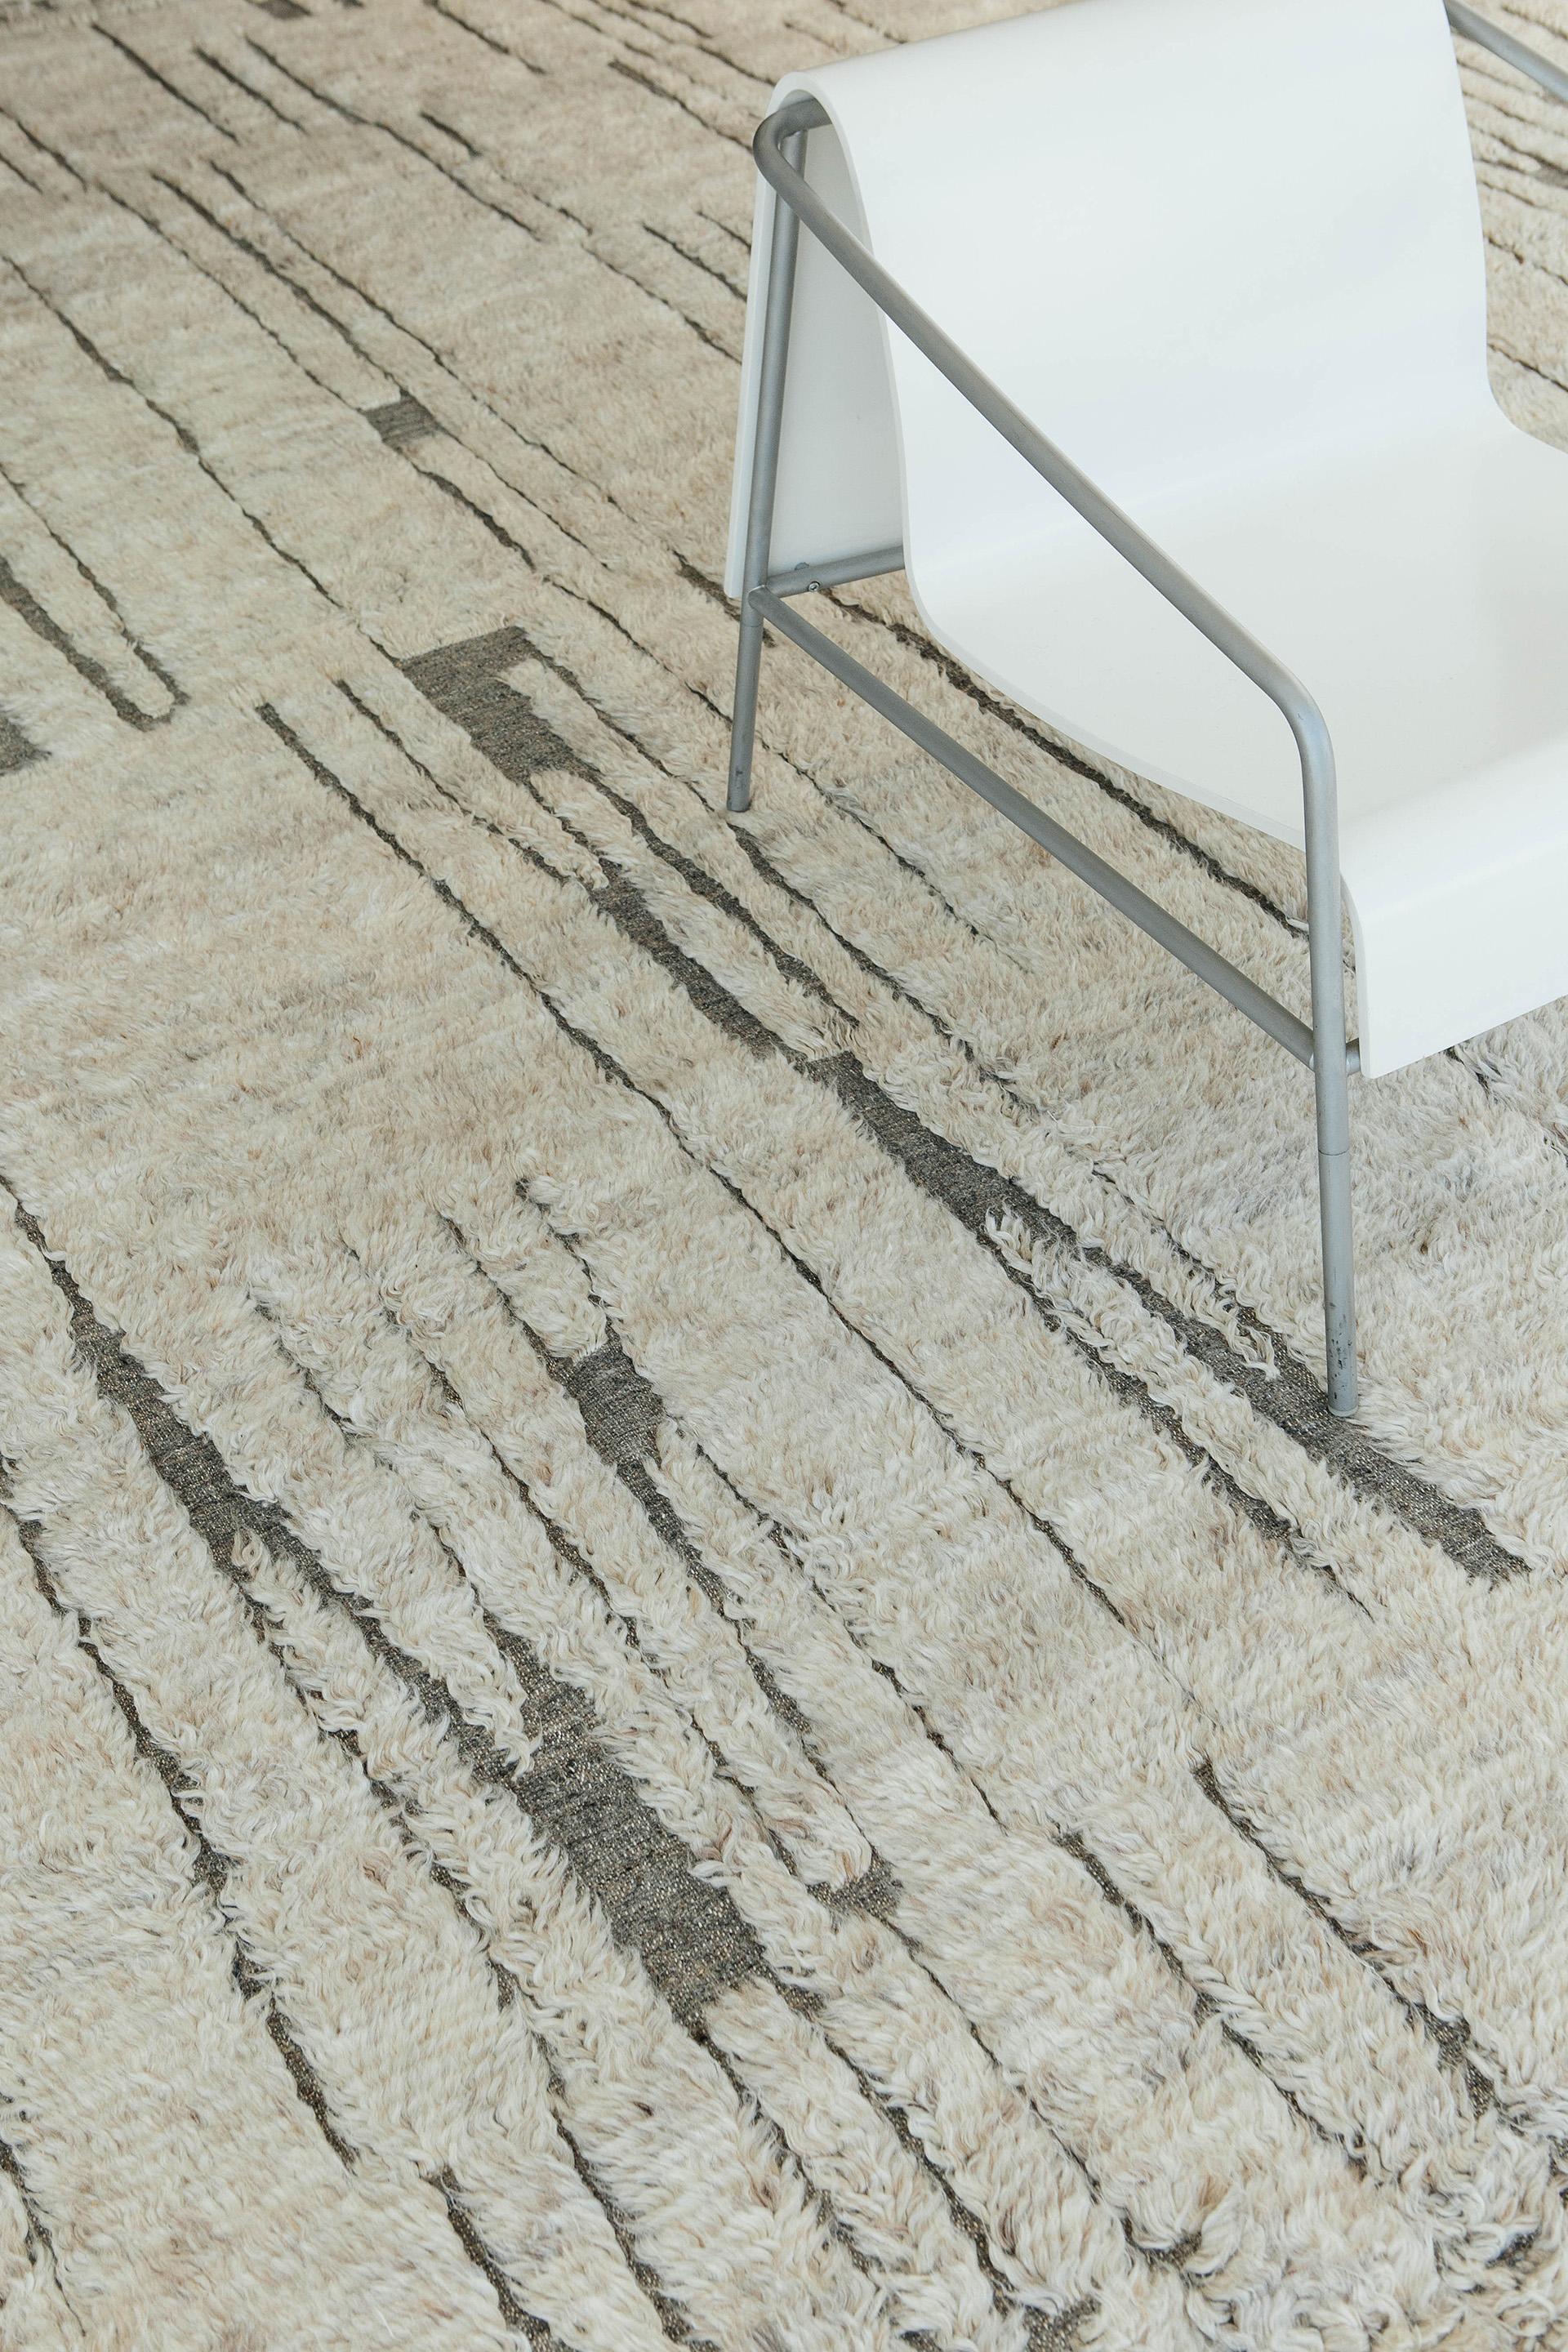 The Coromuel is a windy weather phenomenon that is unique to the coastal areas of California and is a true component of Mehraban's Haute Bohemian collection. This rug's pale blue shag weave flows like the winds of coastal communities and it's